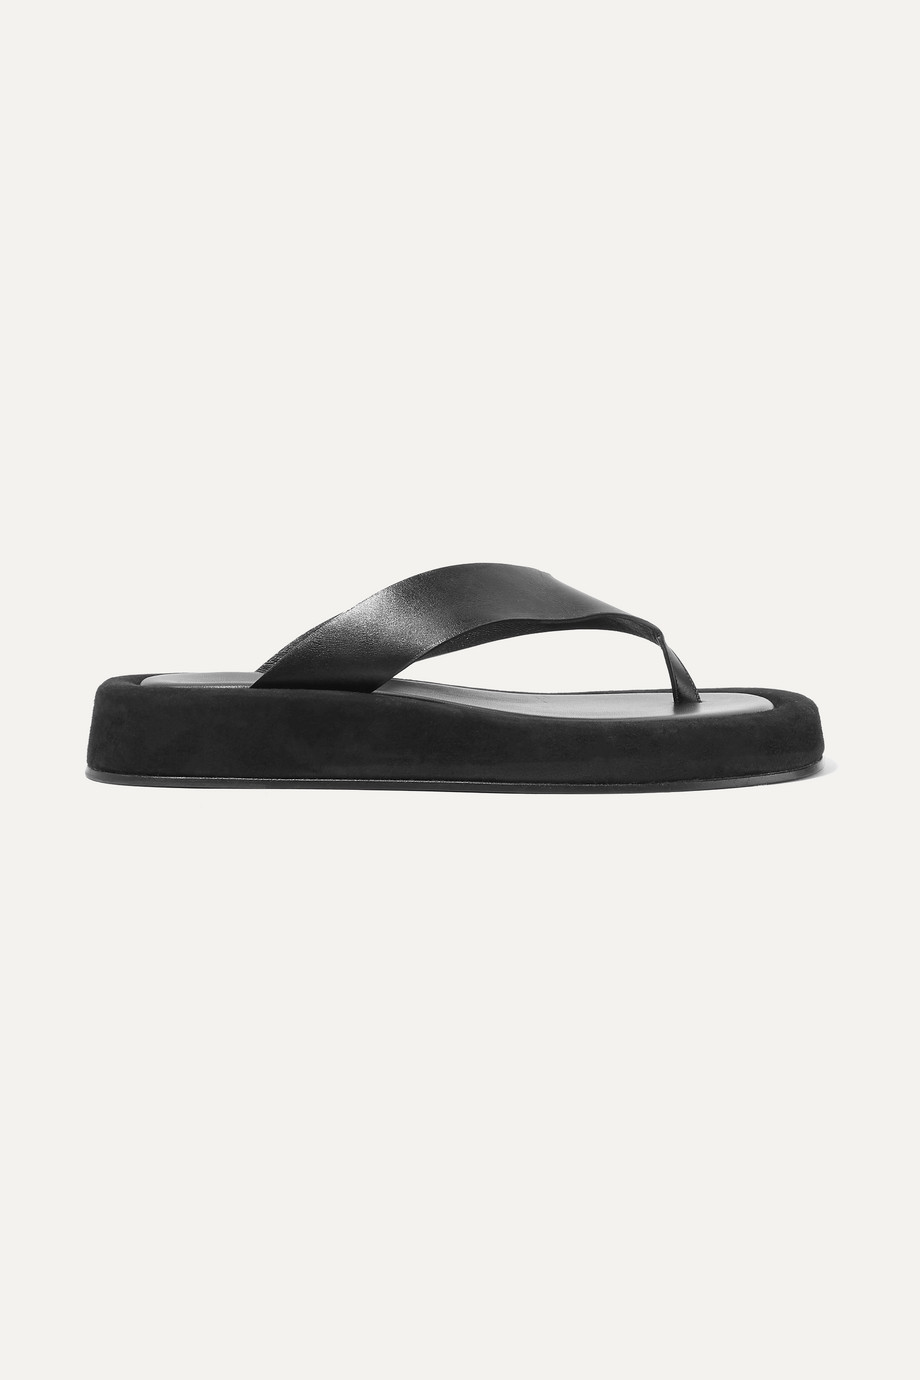 The Best Chunky Flip-Flops to Love and Buy This Season | Who What Wear UK